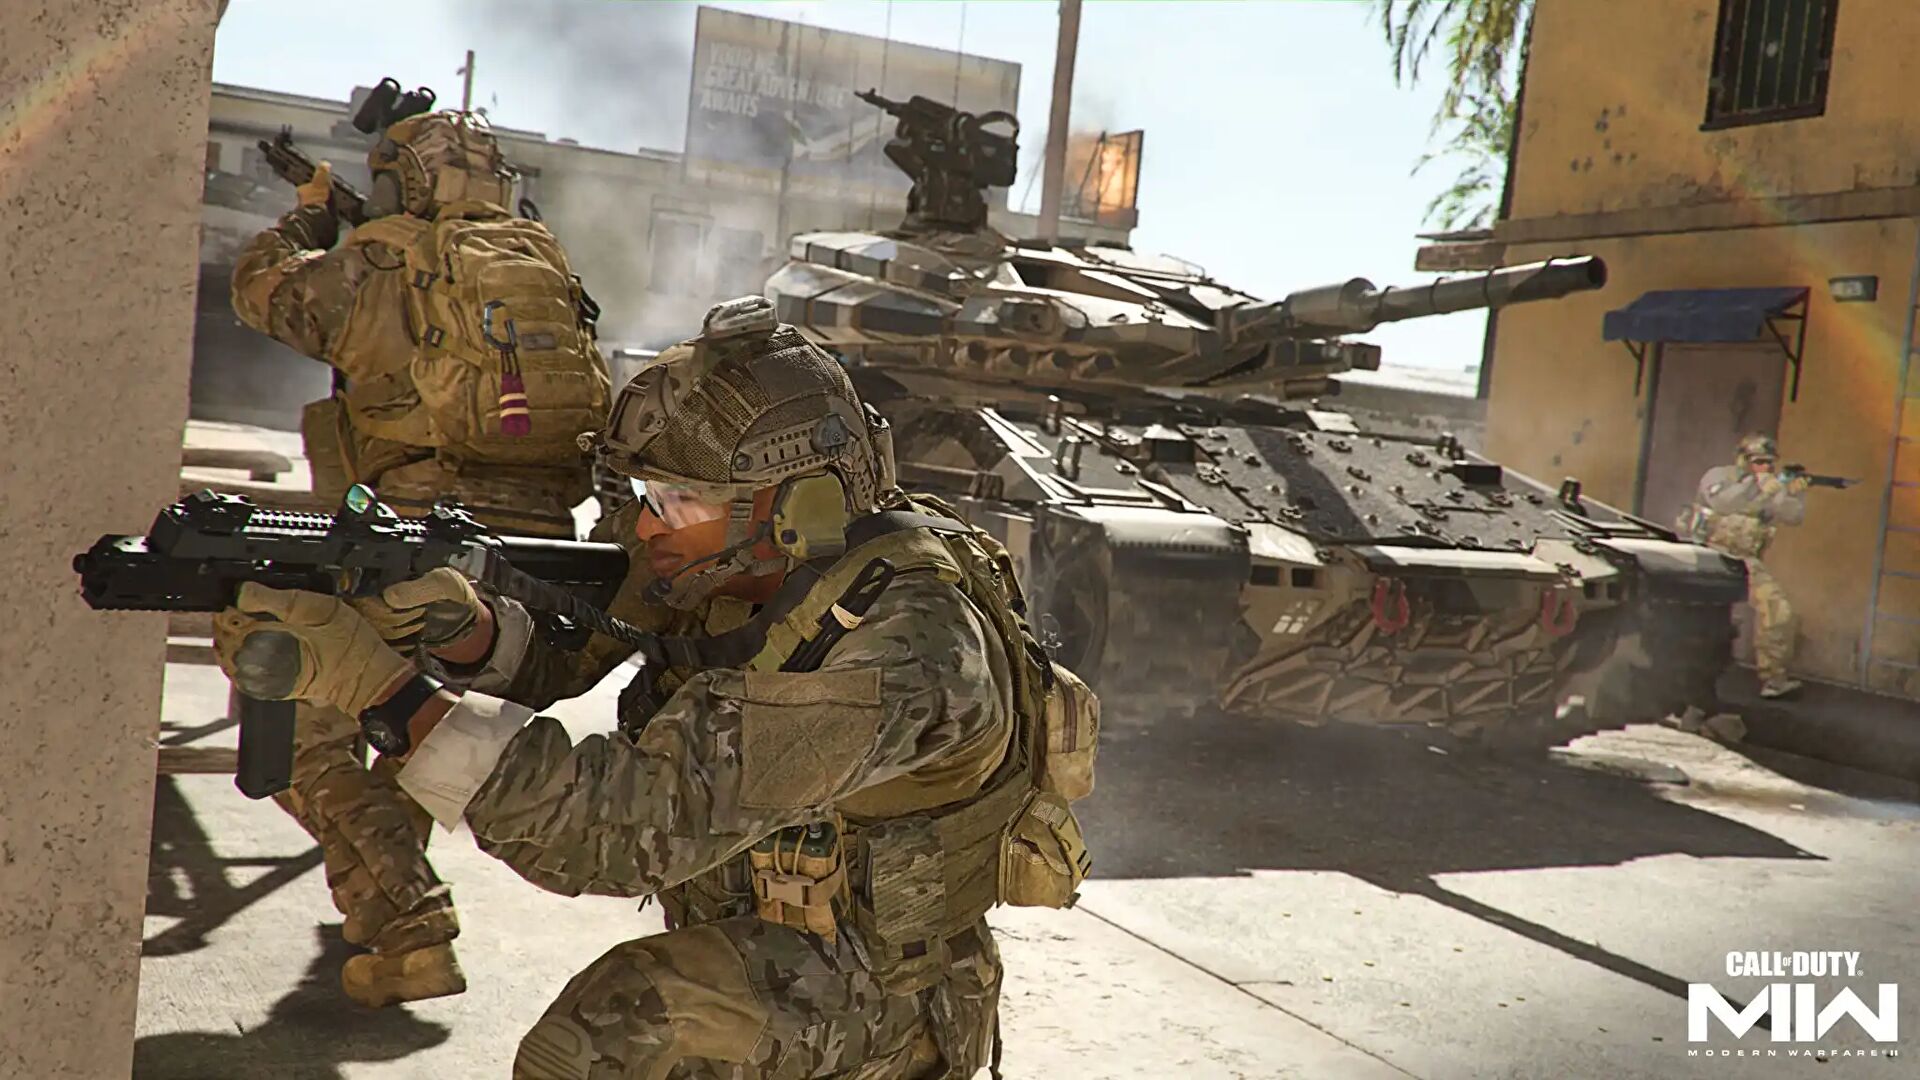 Infinity Ward talks Modern Warfare 2 footstep audio, player visibility, disbanding lobbies and more